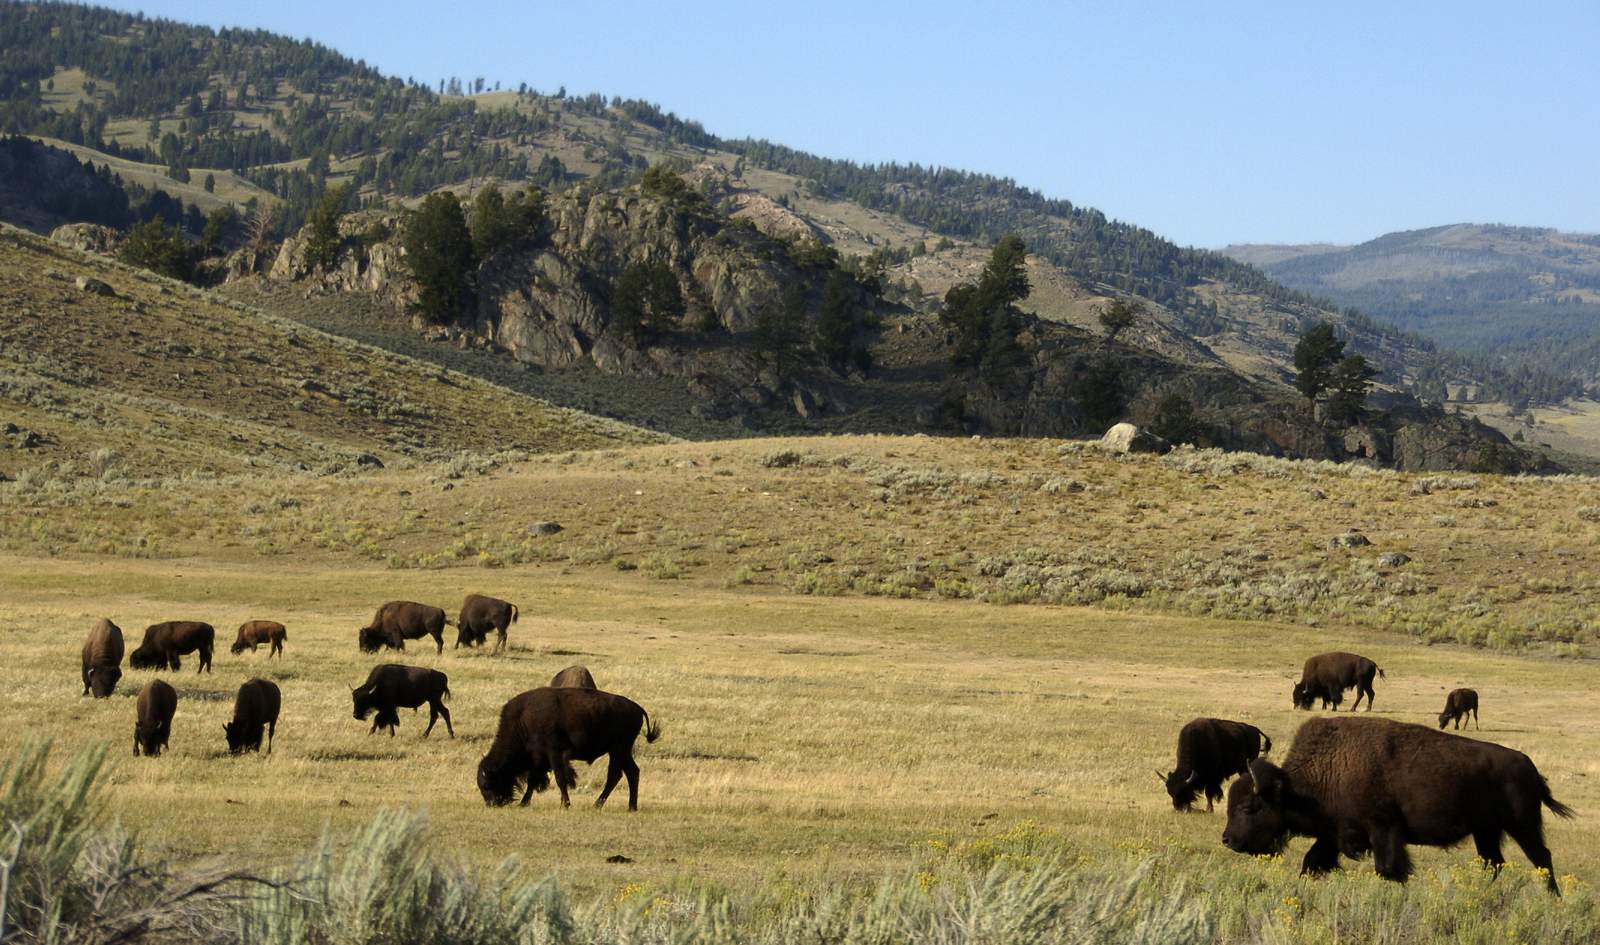 72-year-old woman gored by bison after getting too close for photos, officials confirm